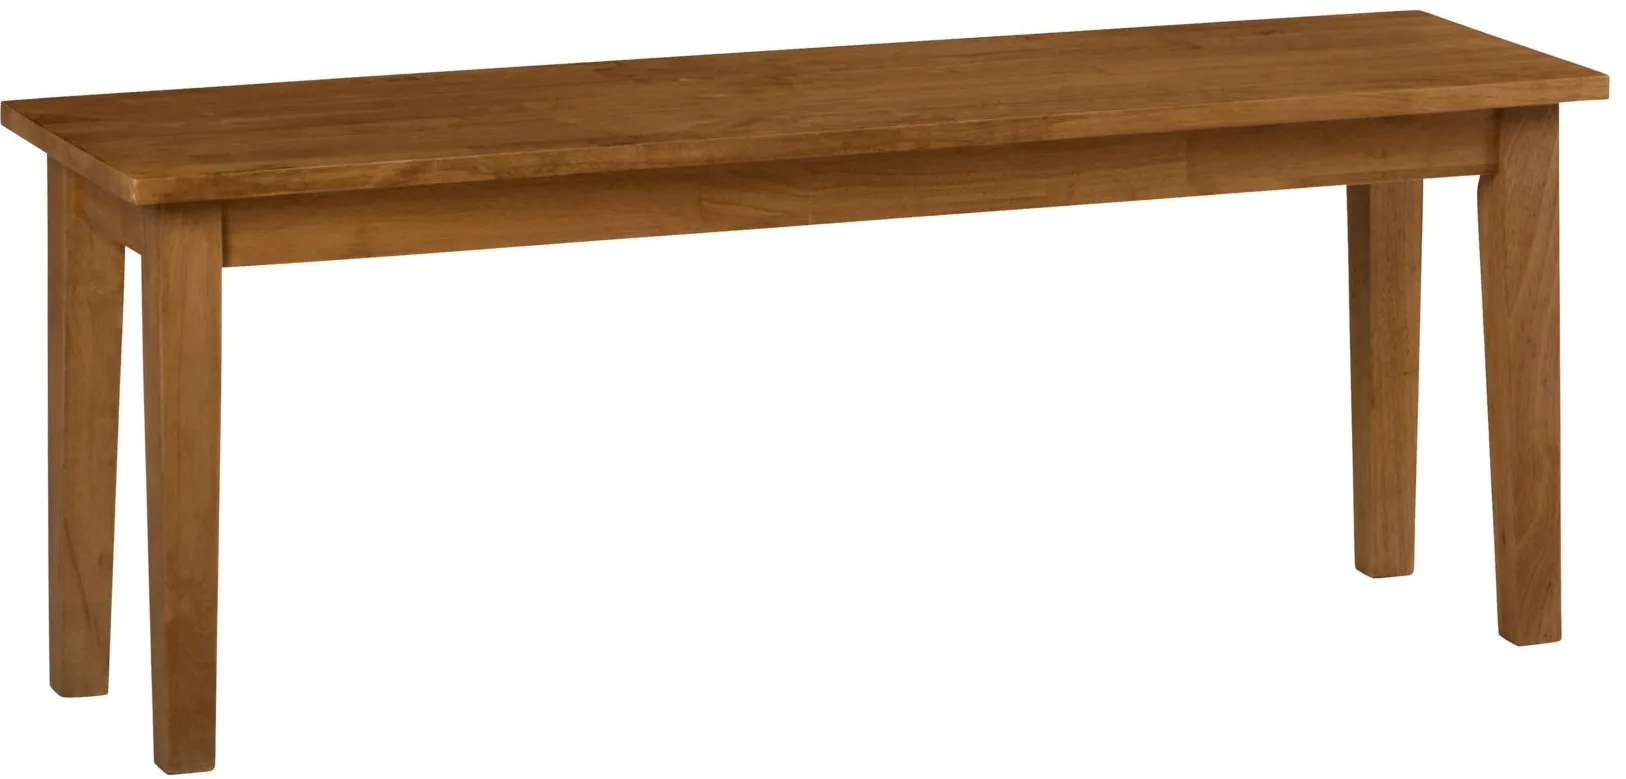 Simplicity Dining Bench in Honey by Jofran